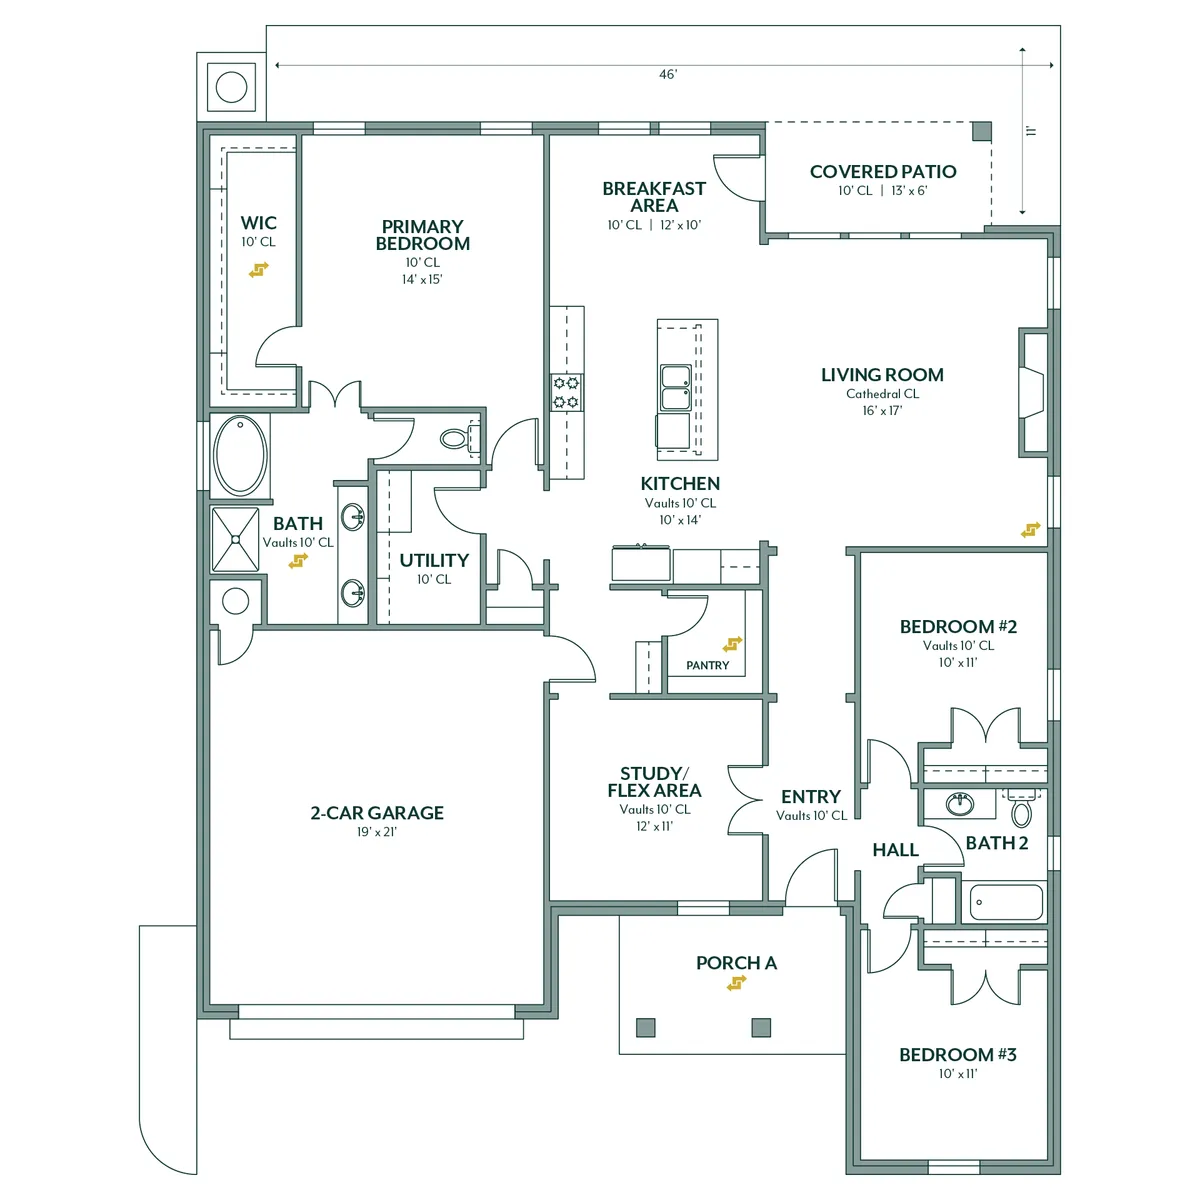 Lawrence. Lawrence Floor Plan - Mountain Cottage - Porch A